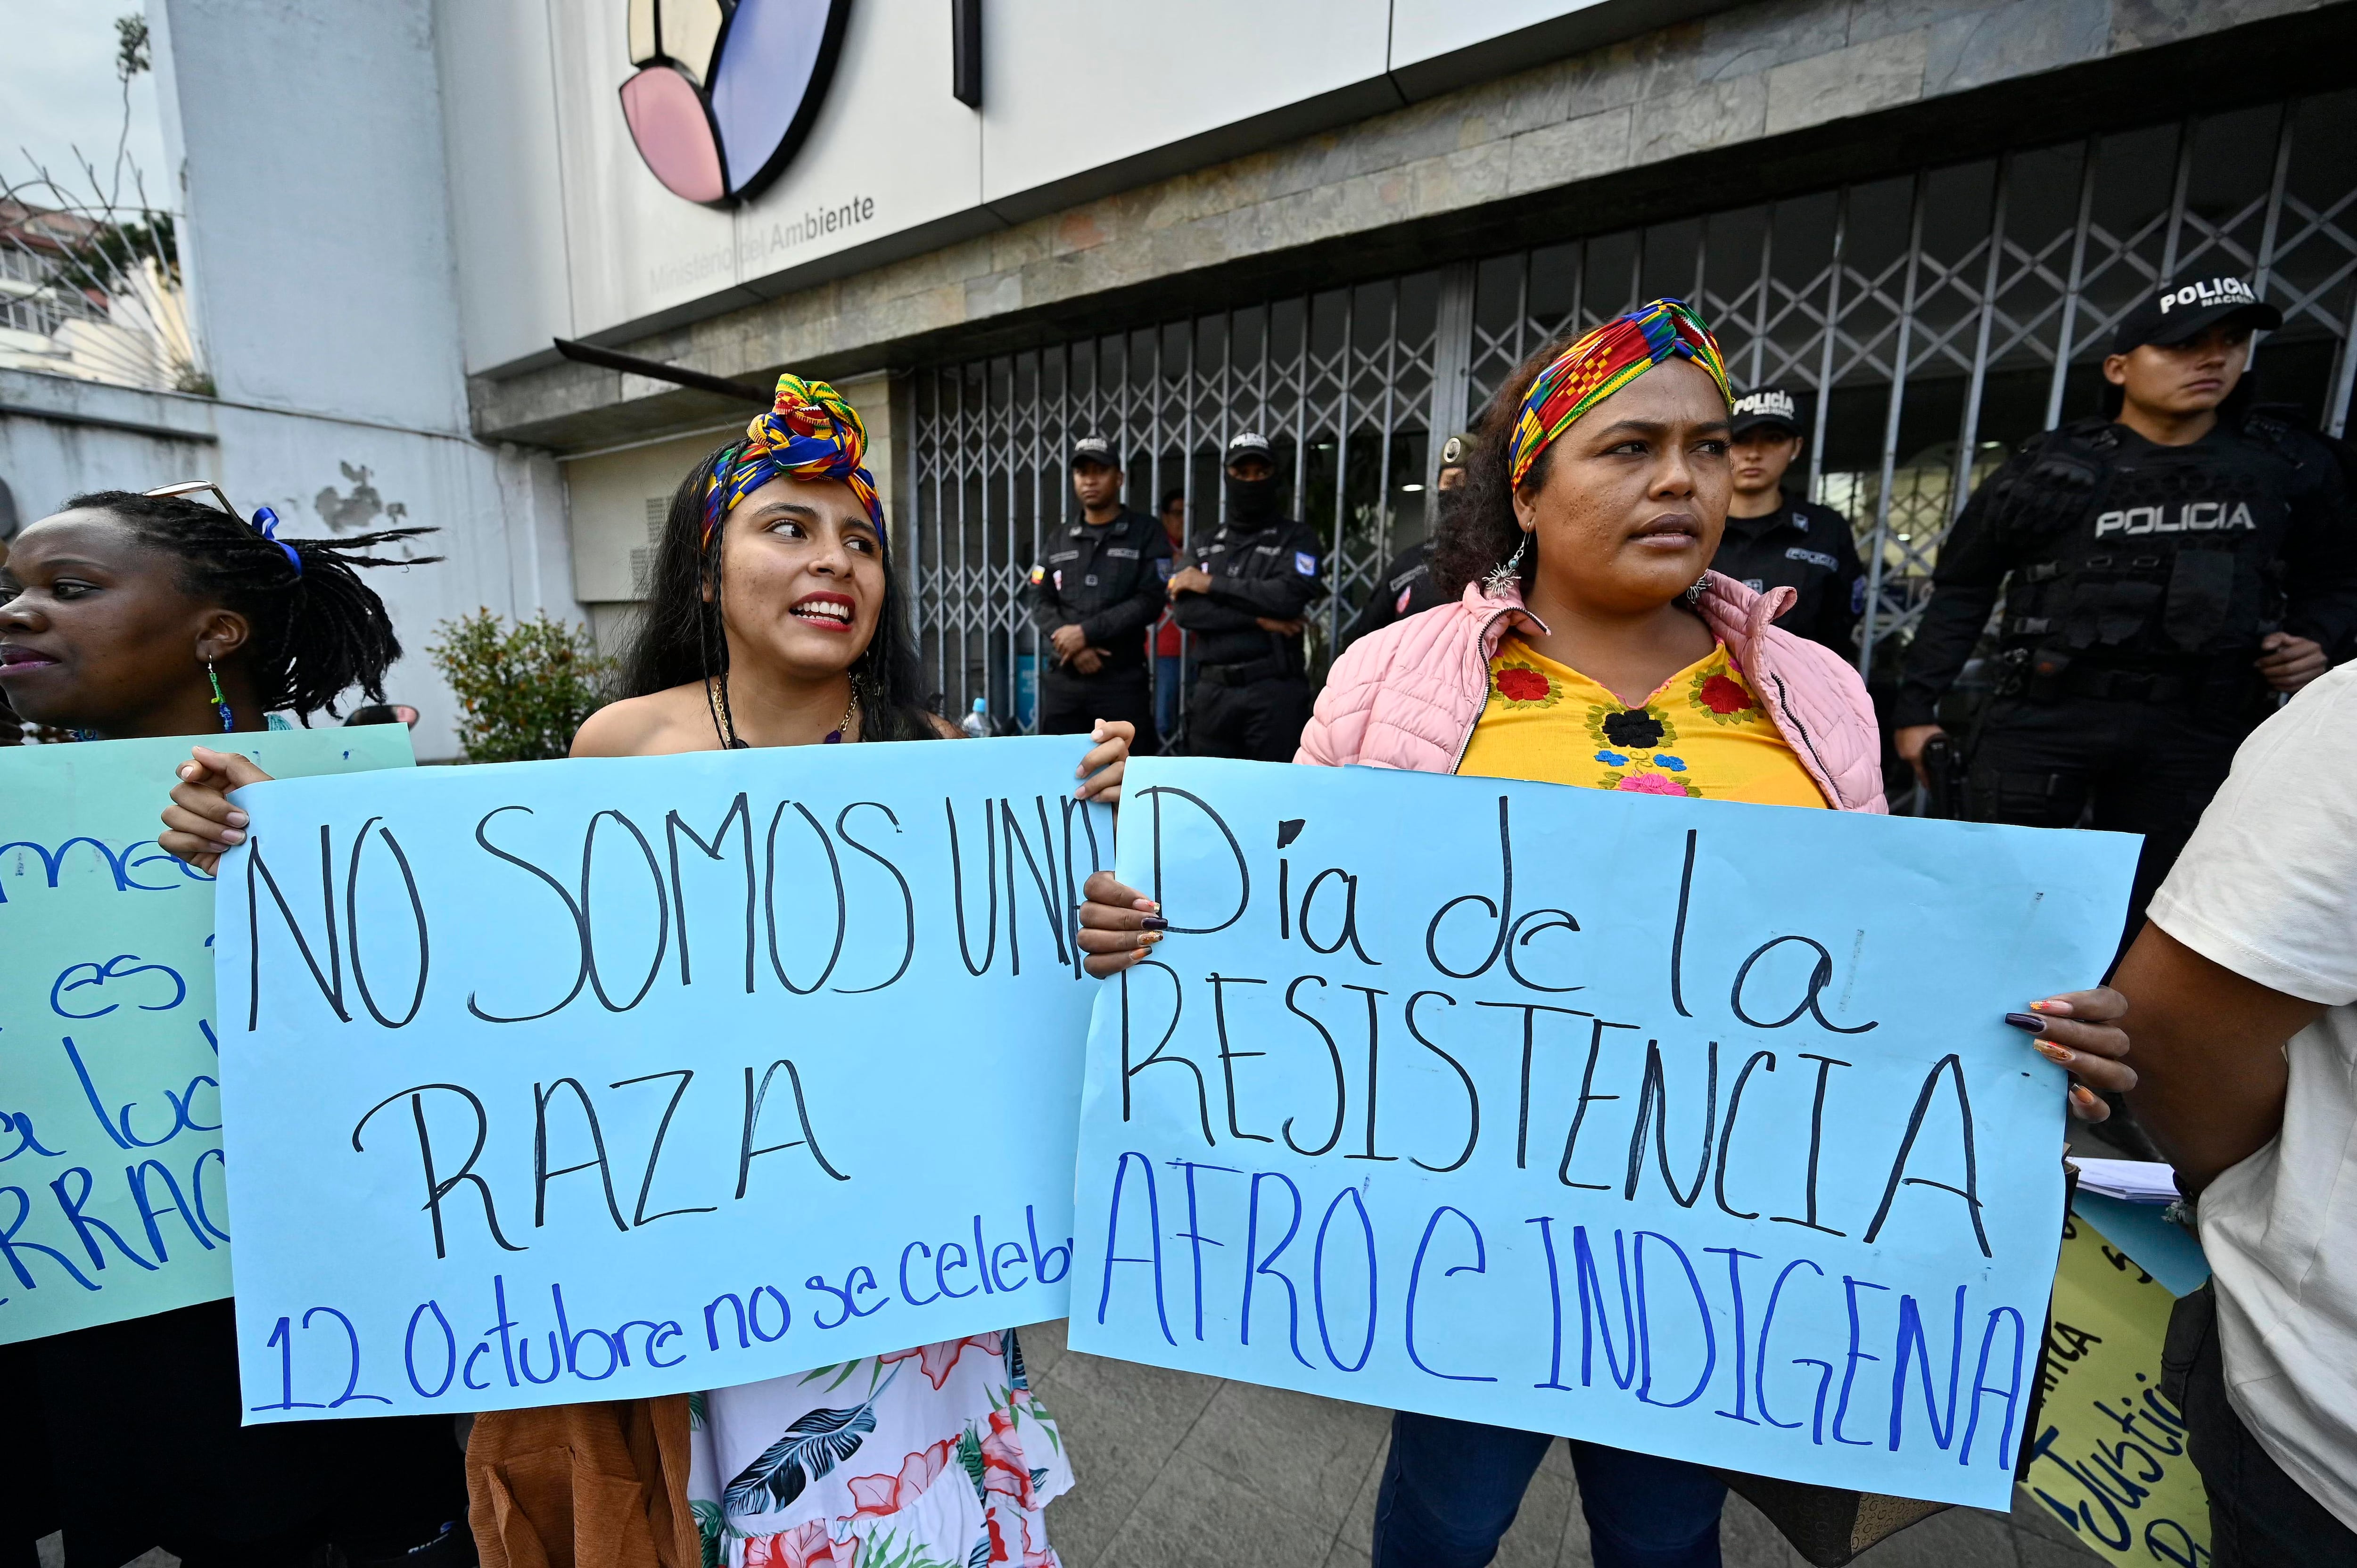 Members of the Black and Indigenous Liberation Movement (BILM) protest in front of the Ministry of the Environment in commemoration of Columbus Day, in the north of Quito, on October 12, 2022. (Photo by RODRIGO BUENDIA / AFP)